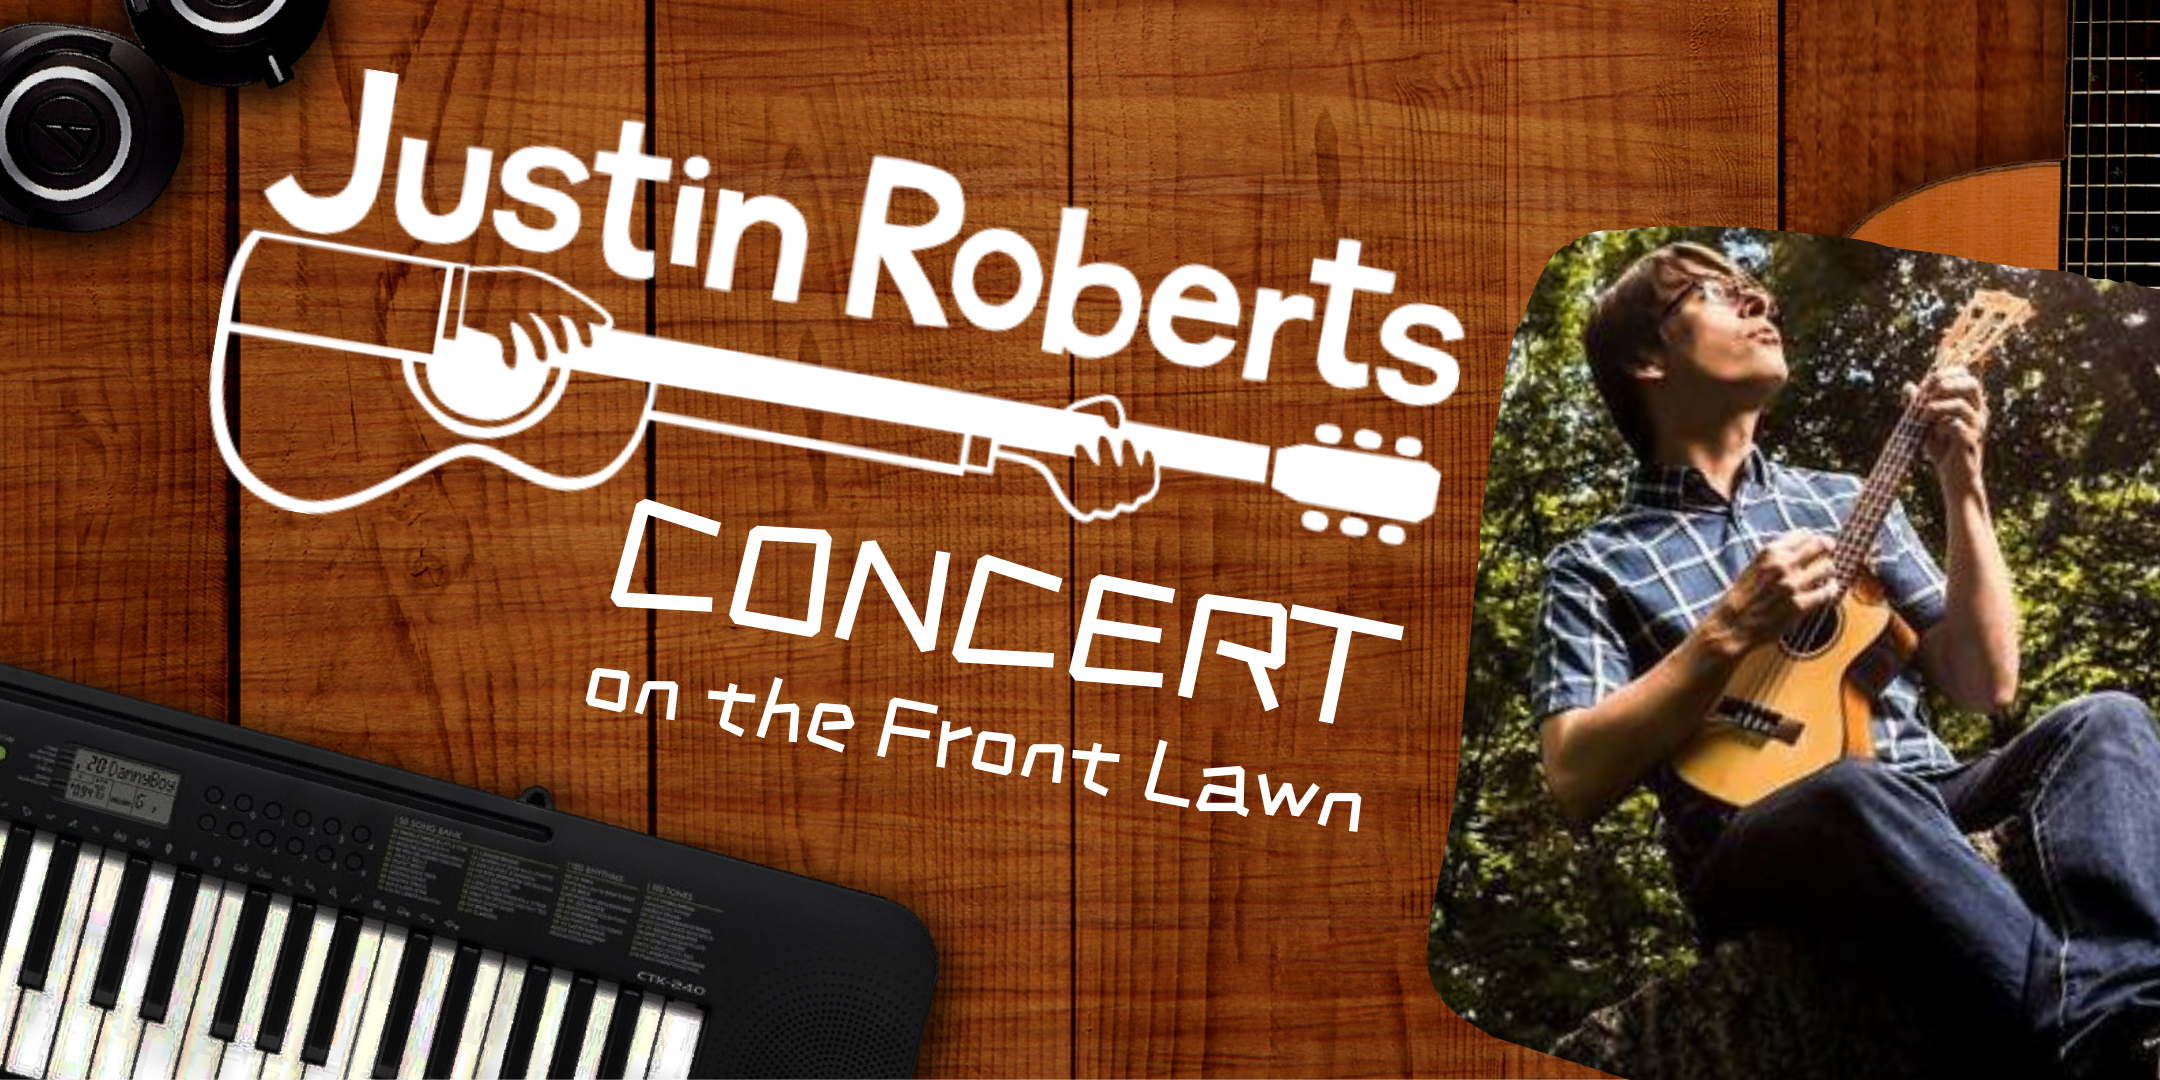 Image of "Justin Roberts Concert on the Front Lawn" event